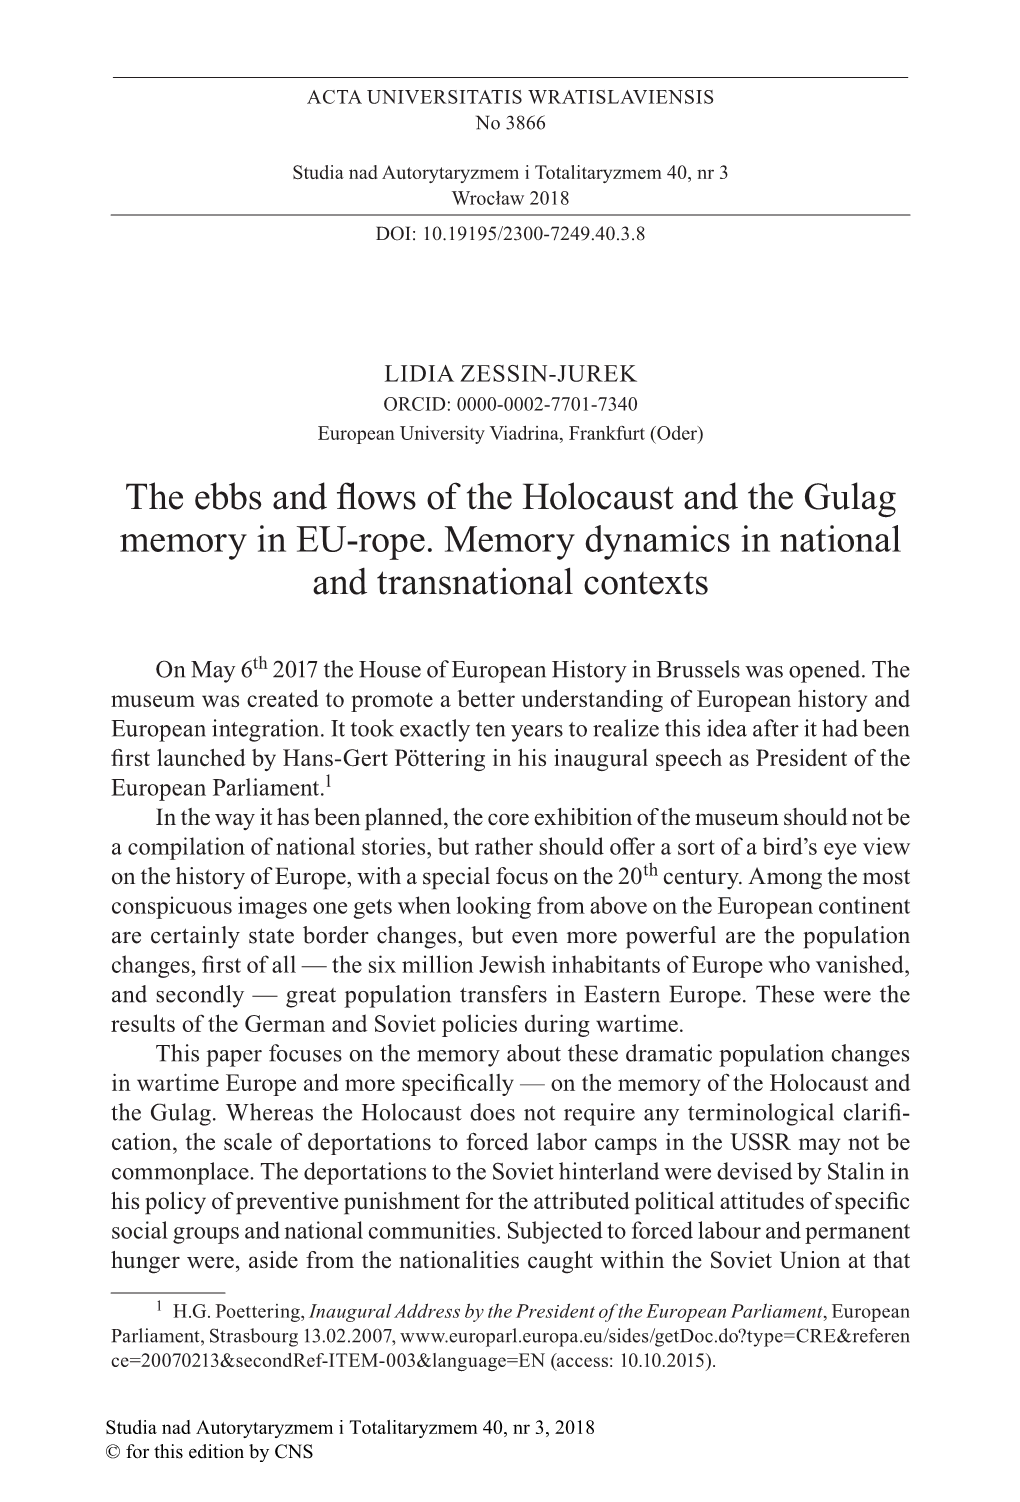 The Ebbs and Flows of the Holocaust and the Gulag Memory in Eu-Rope